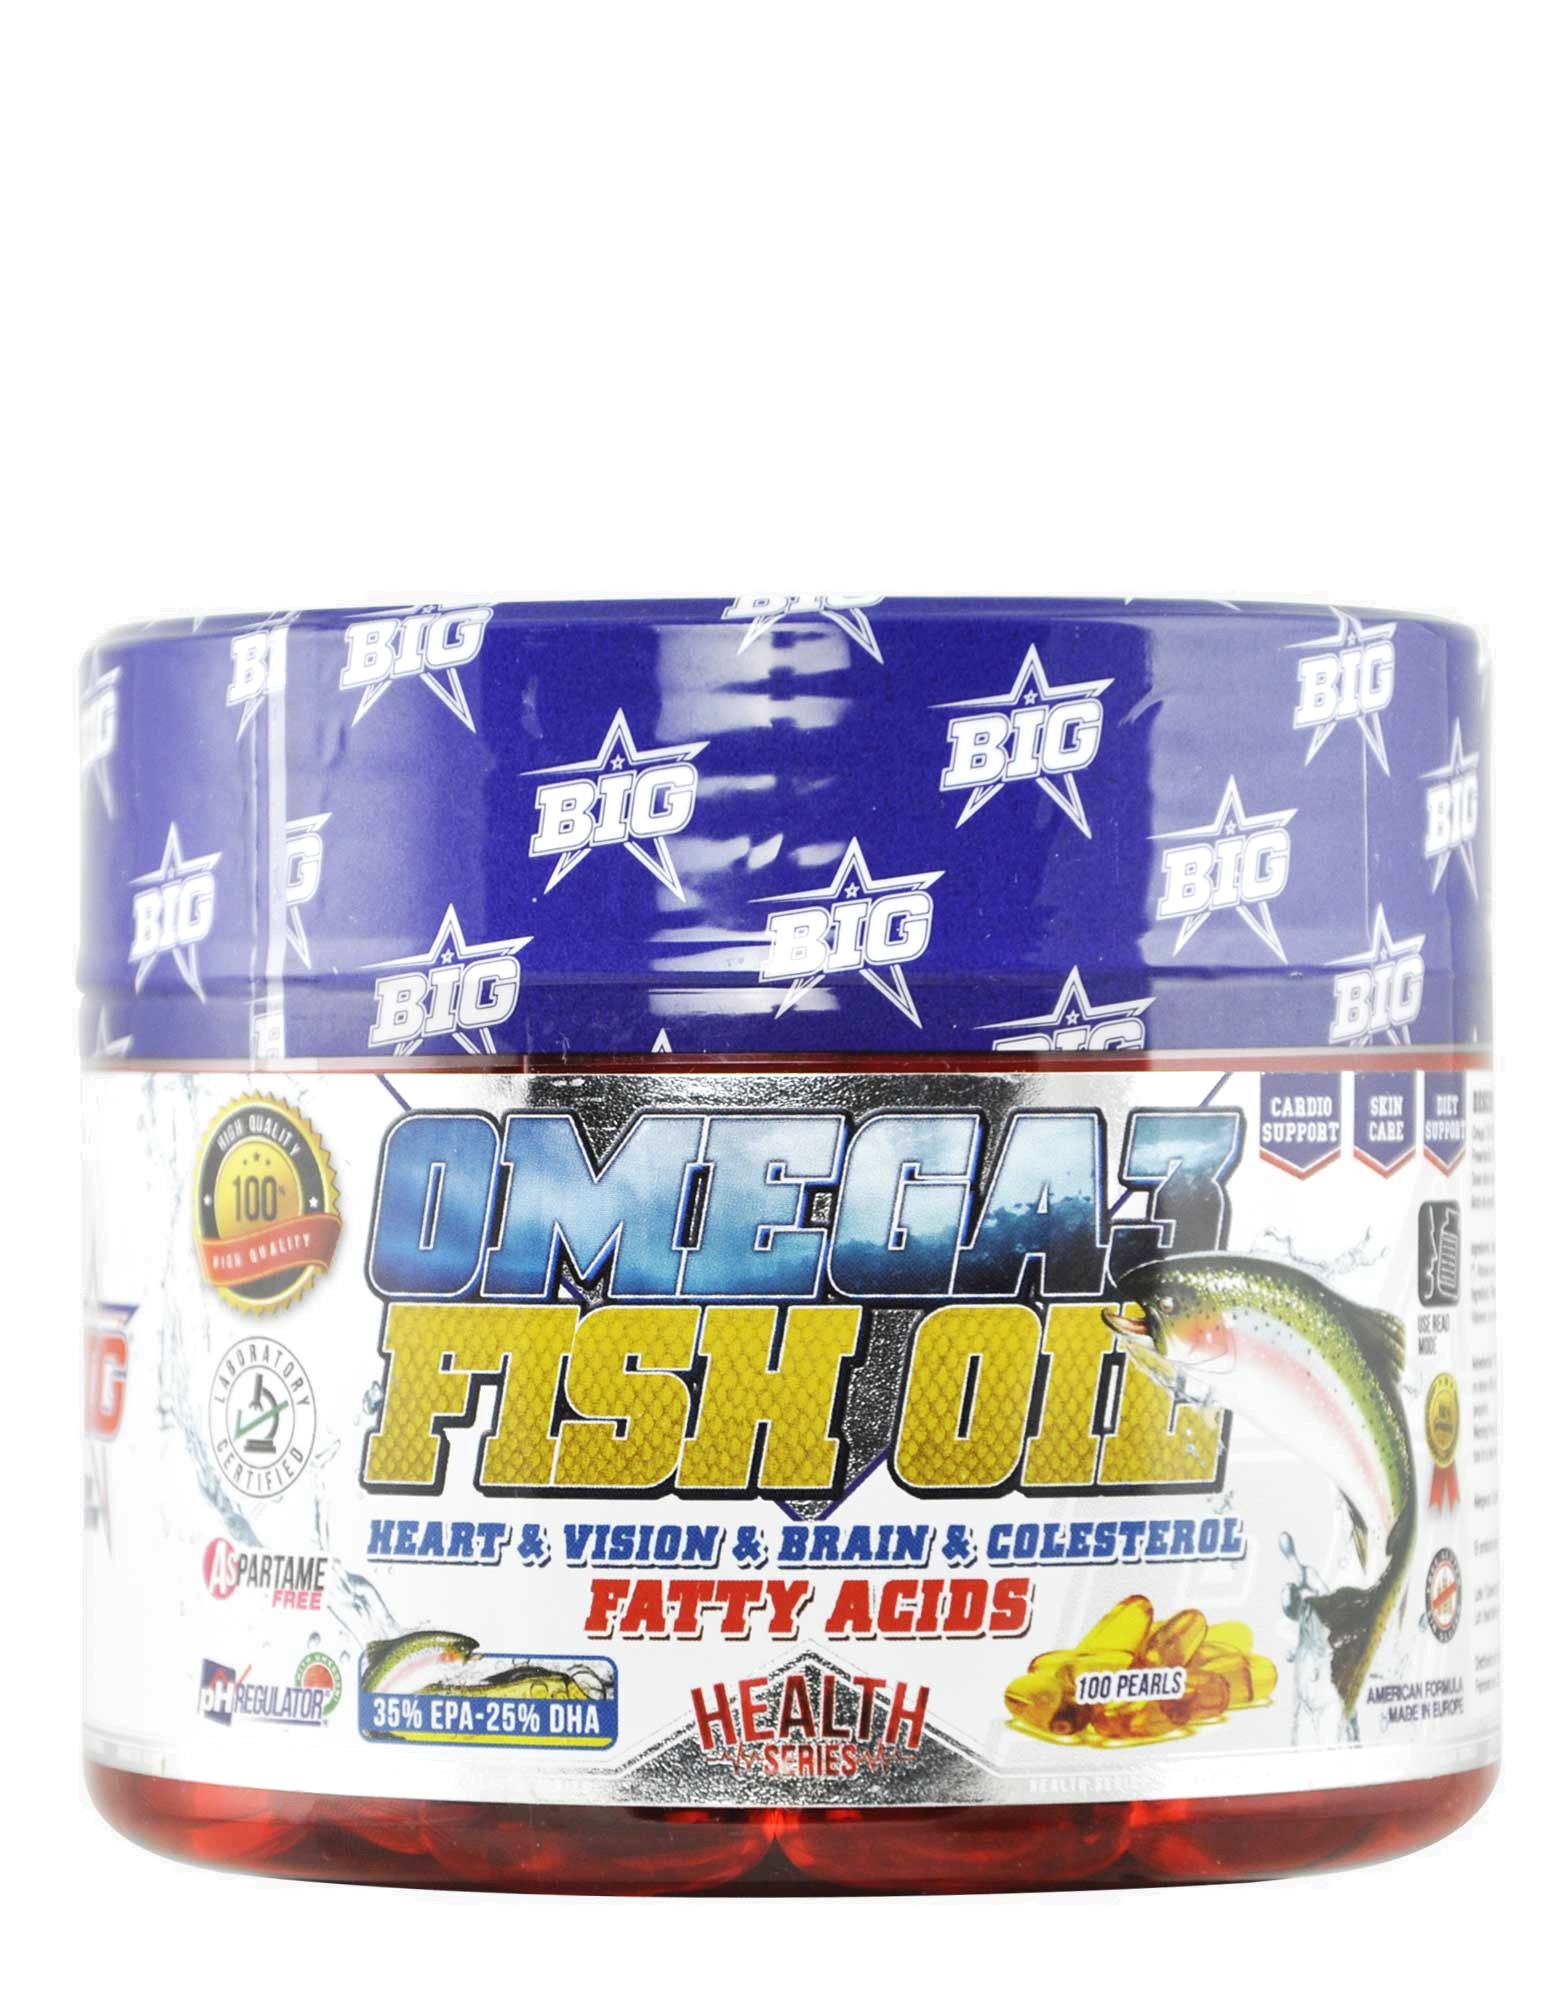 BIG Omega 3 Fish Oil by UNIVERSAL MCGREGOR (100 pearls)